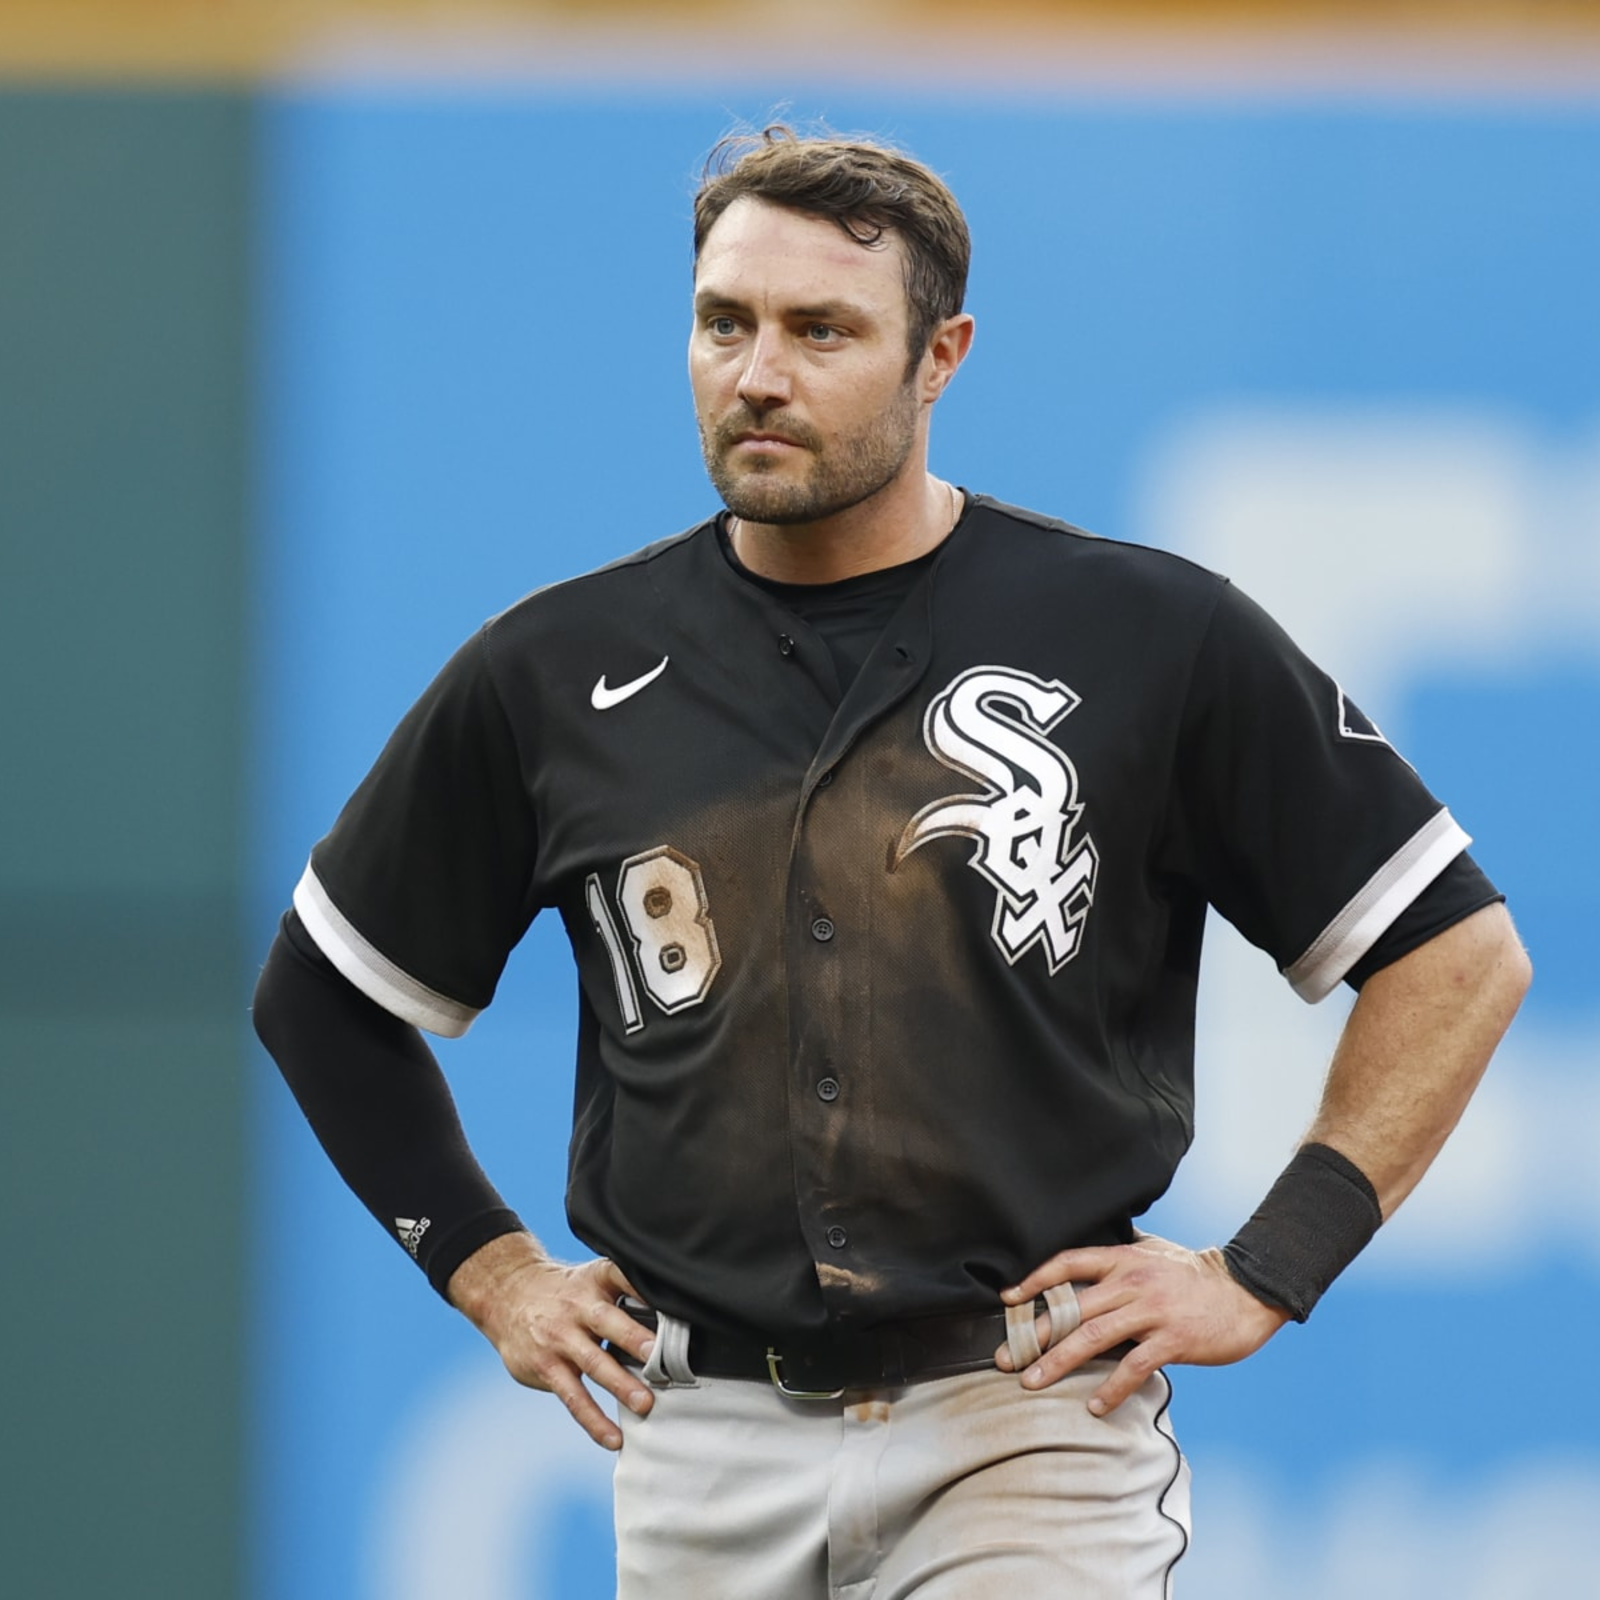 AJ Pollock declines option with White Sox - Chicago Sun-Times